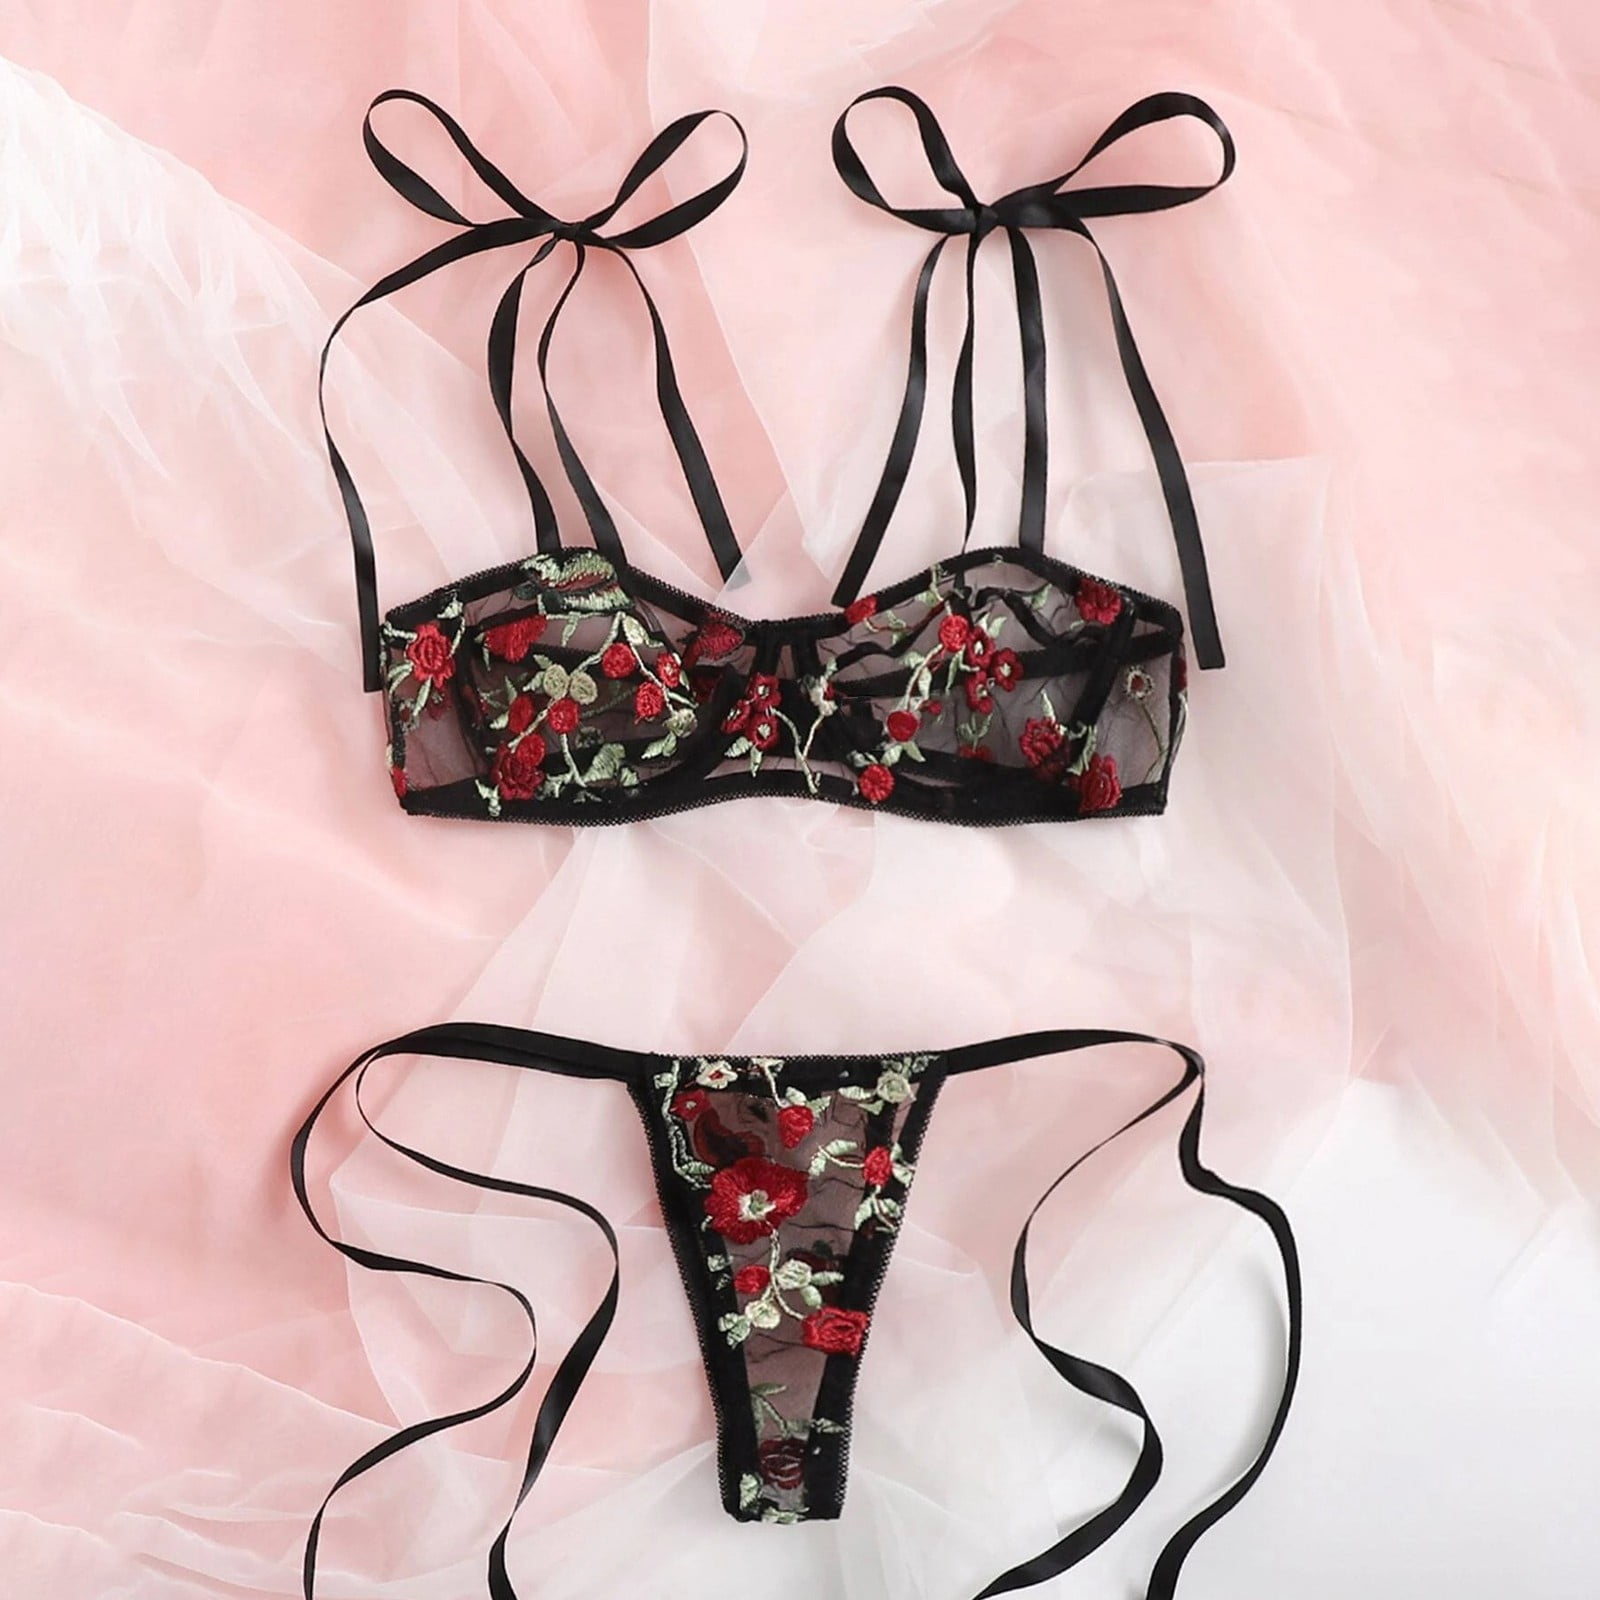 Buy Lovehome Lingerie Flower Embroidery G String Thong Underwear Sleepwear New Fashion Online At